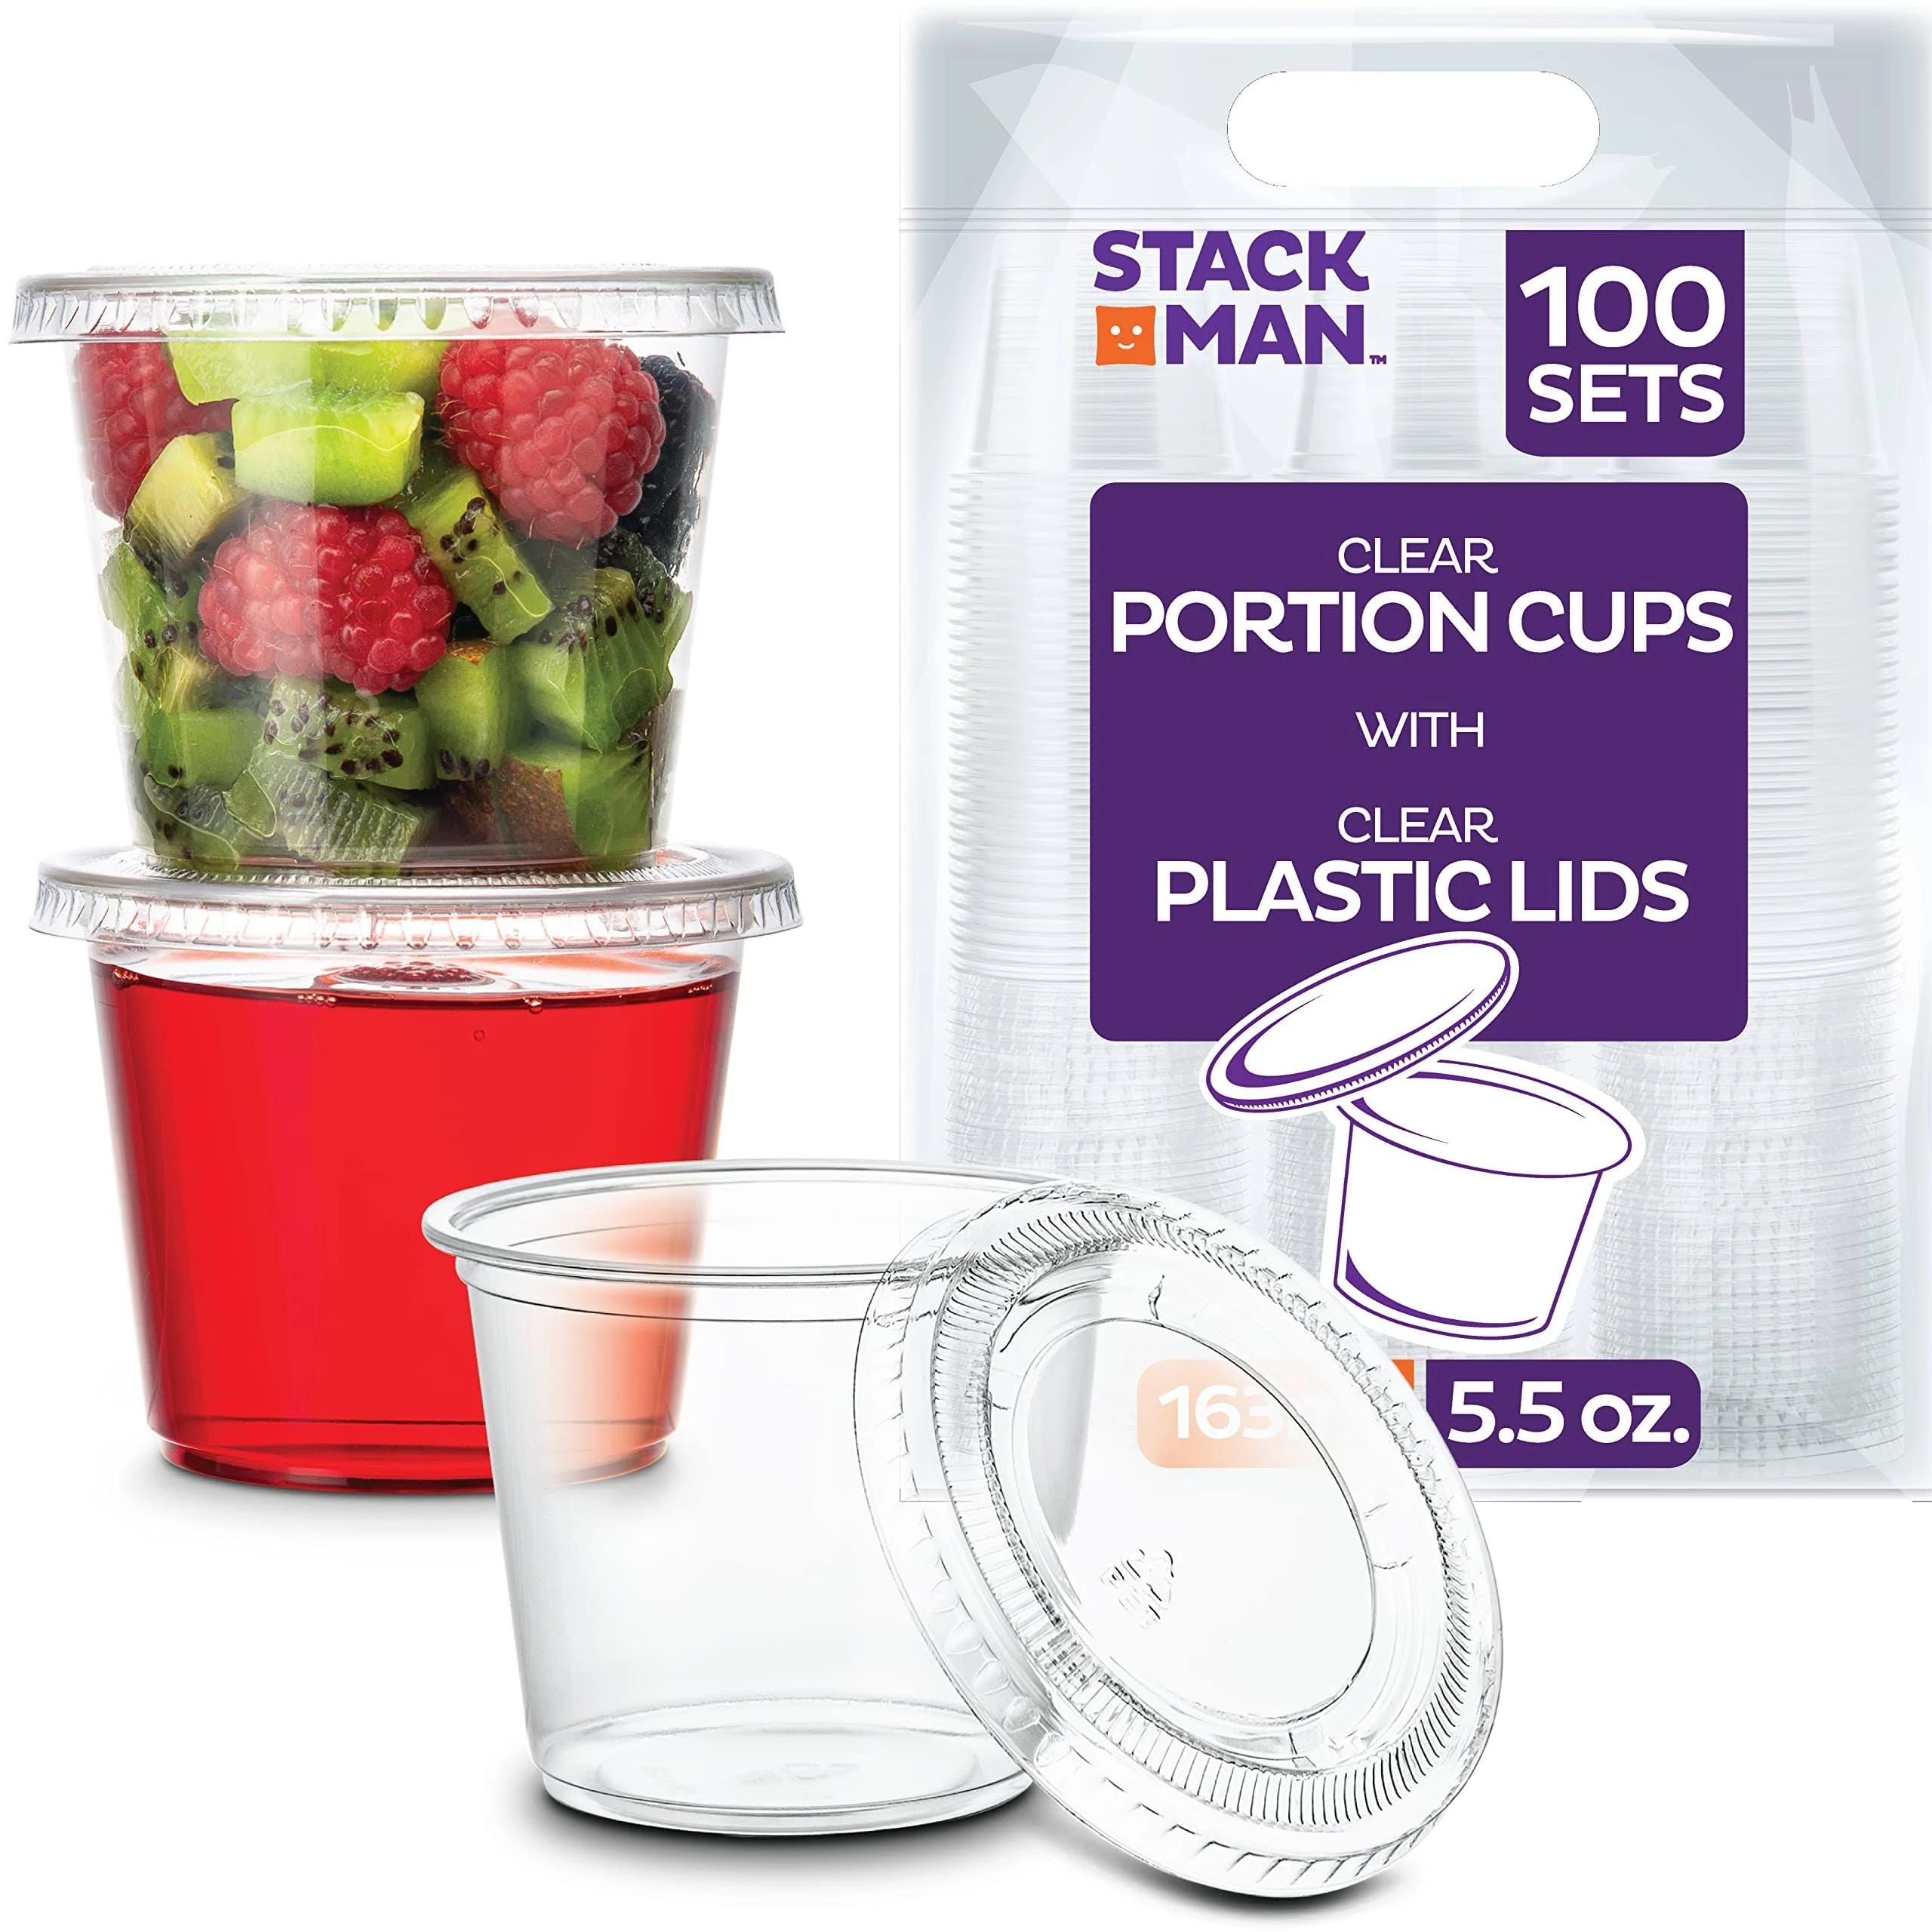 Stack Man Mini Plastic Souffle Cups with Lid - 100 Sets, Ideal for Party or Meal Prep | Image